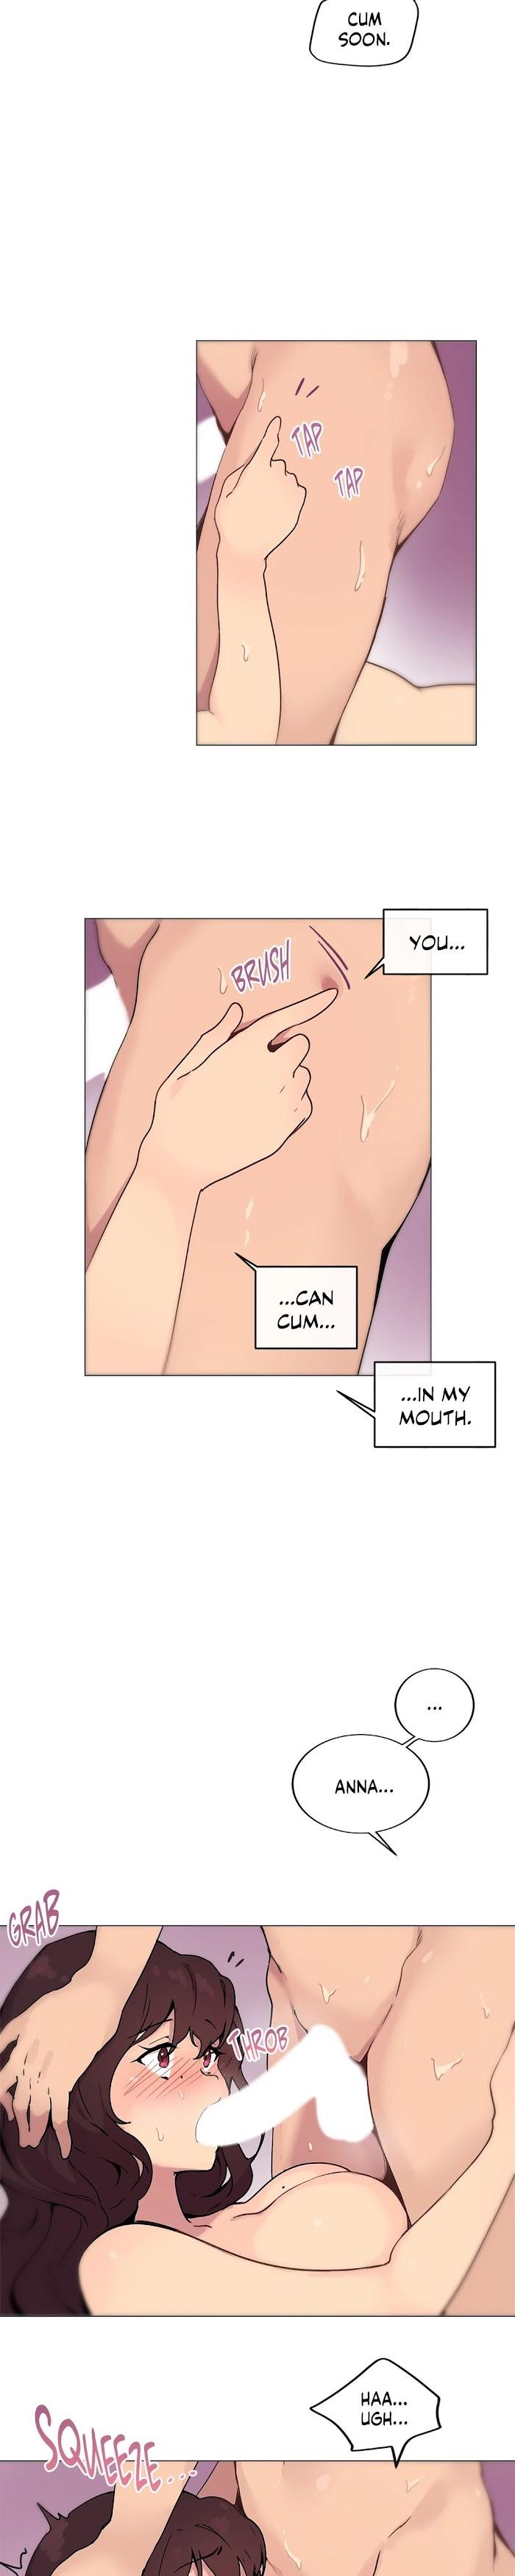 [Dumangoon, 130F] Sexcape Room: Wipe Out Ch.9/9 [English] [Manhwa PDF] Completed 141